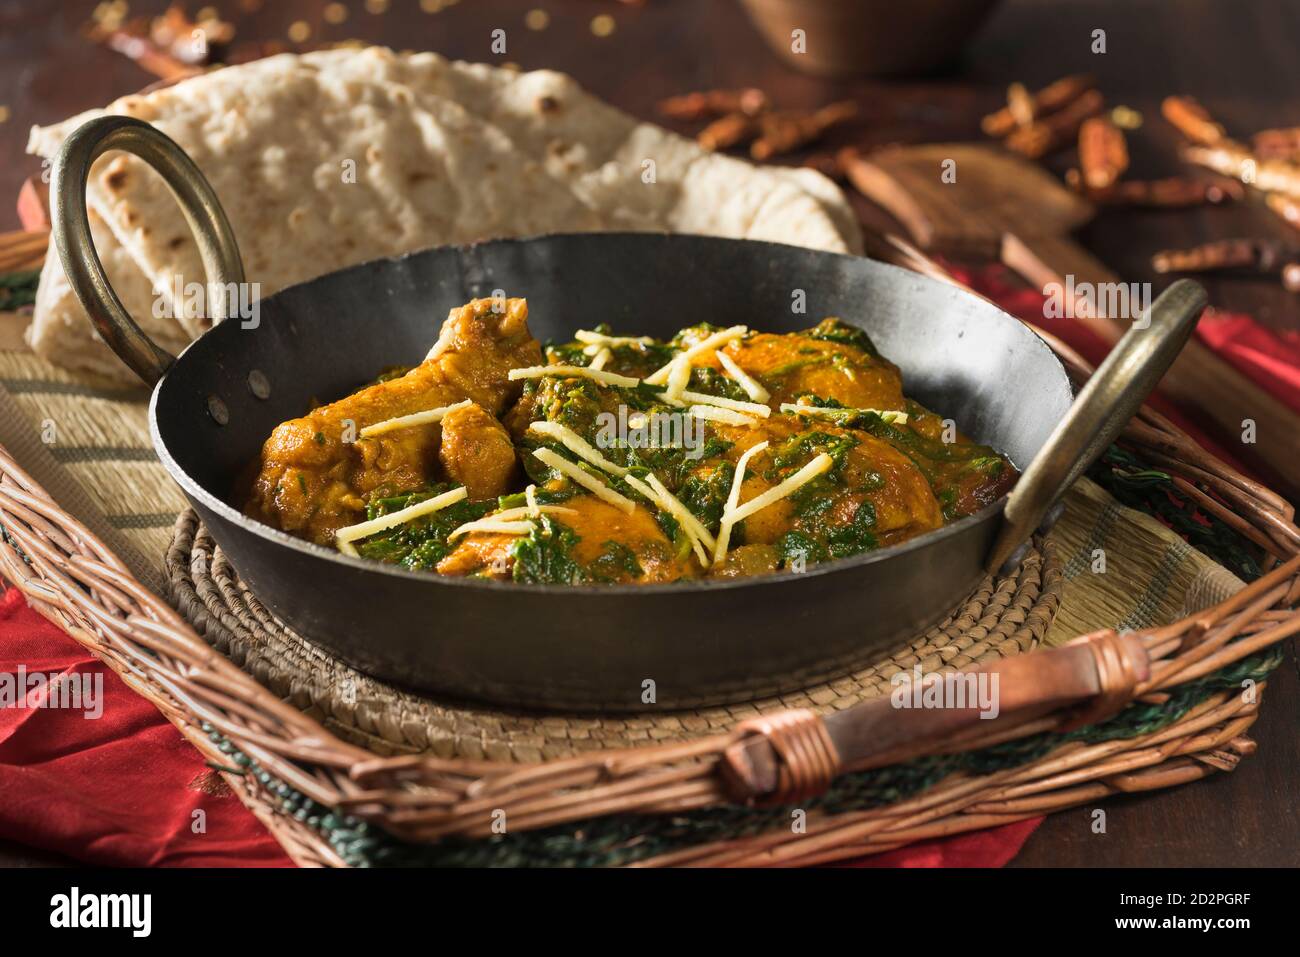 Palak murgh. Chicken and spinach curry. India Food Stock Photo